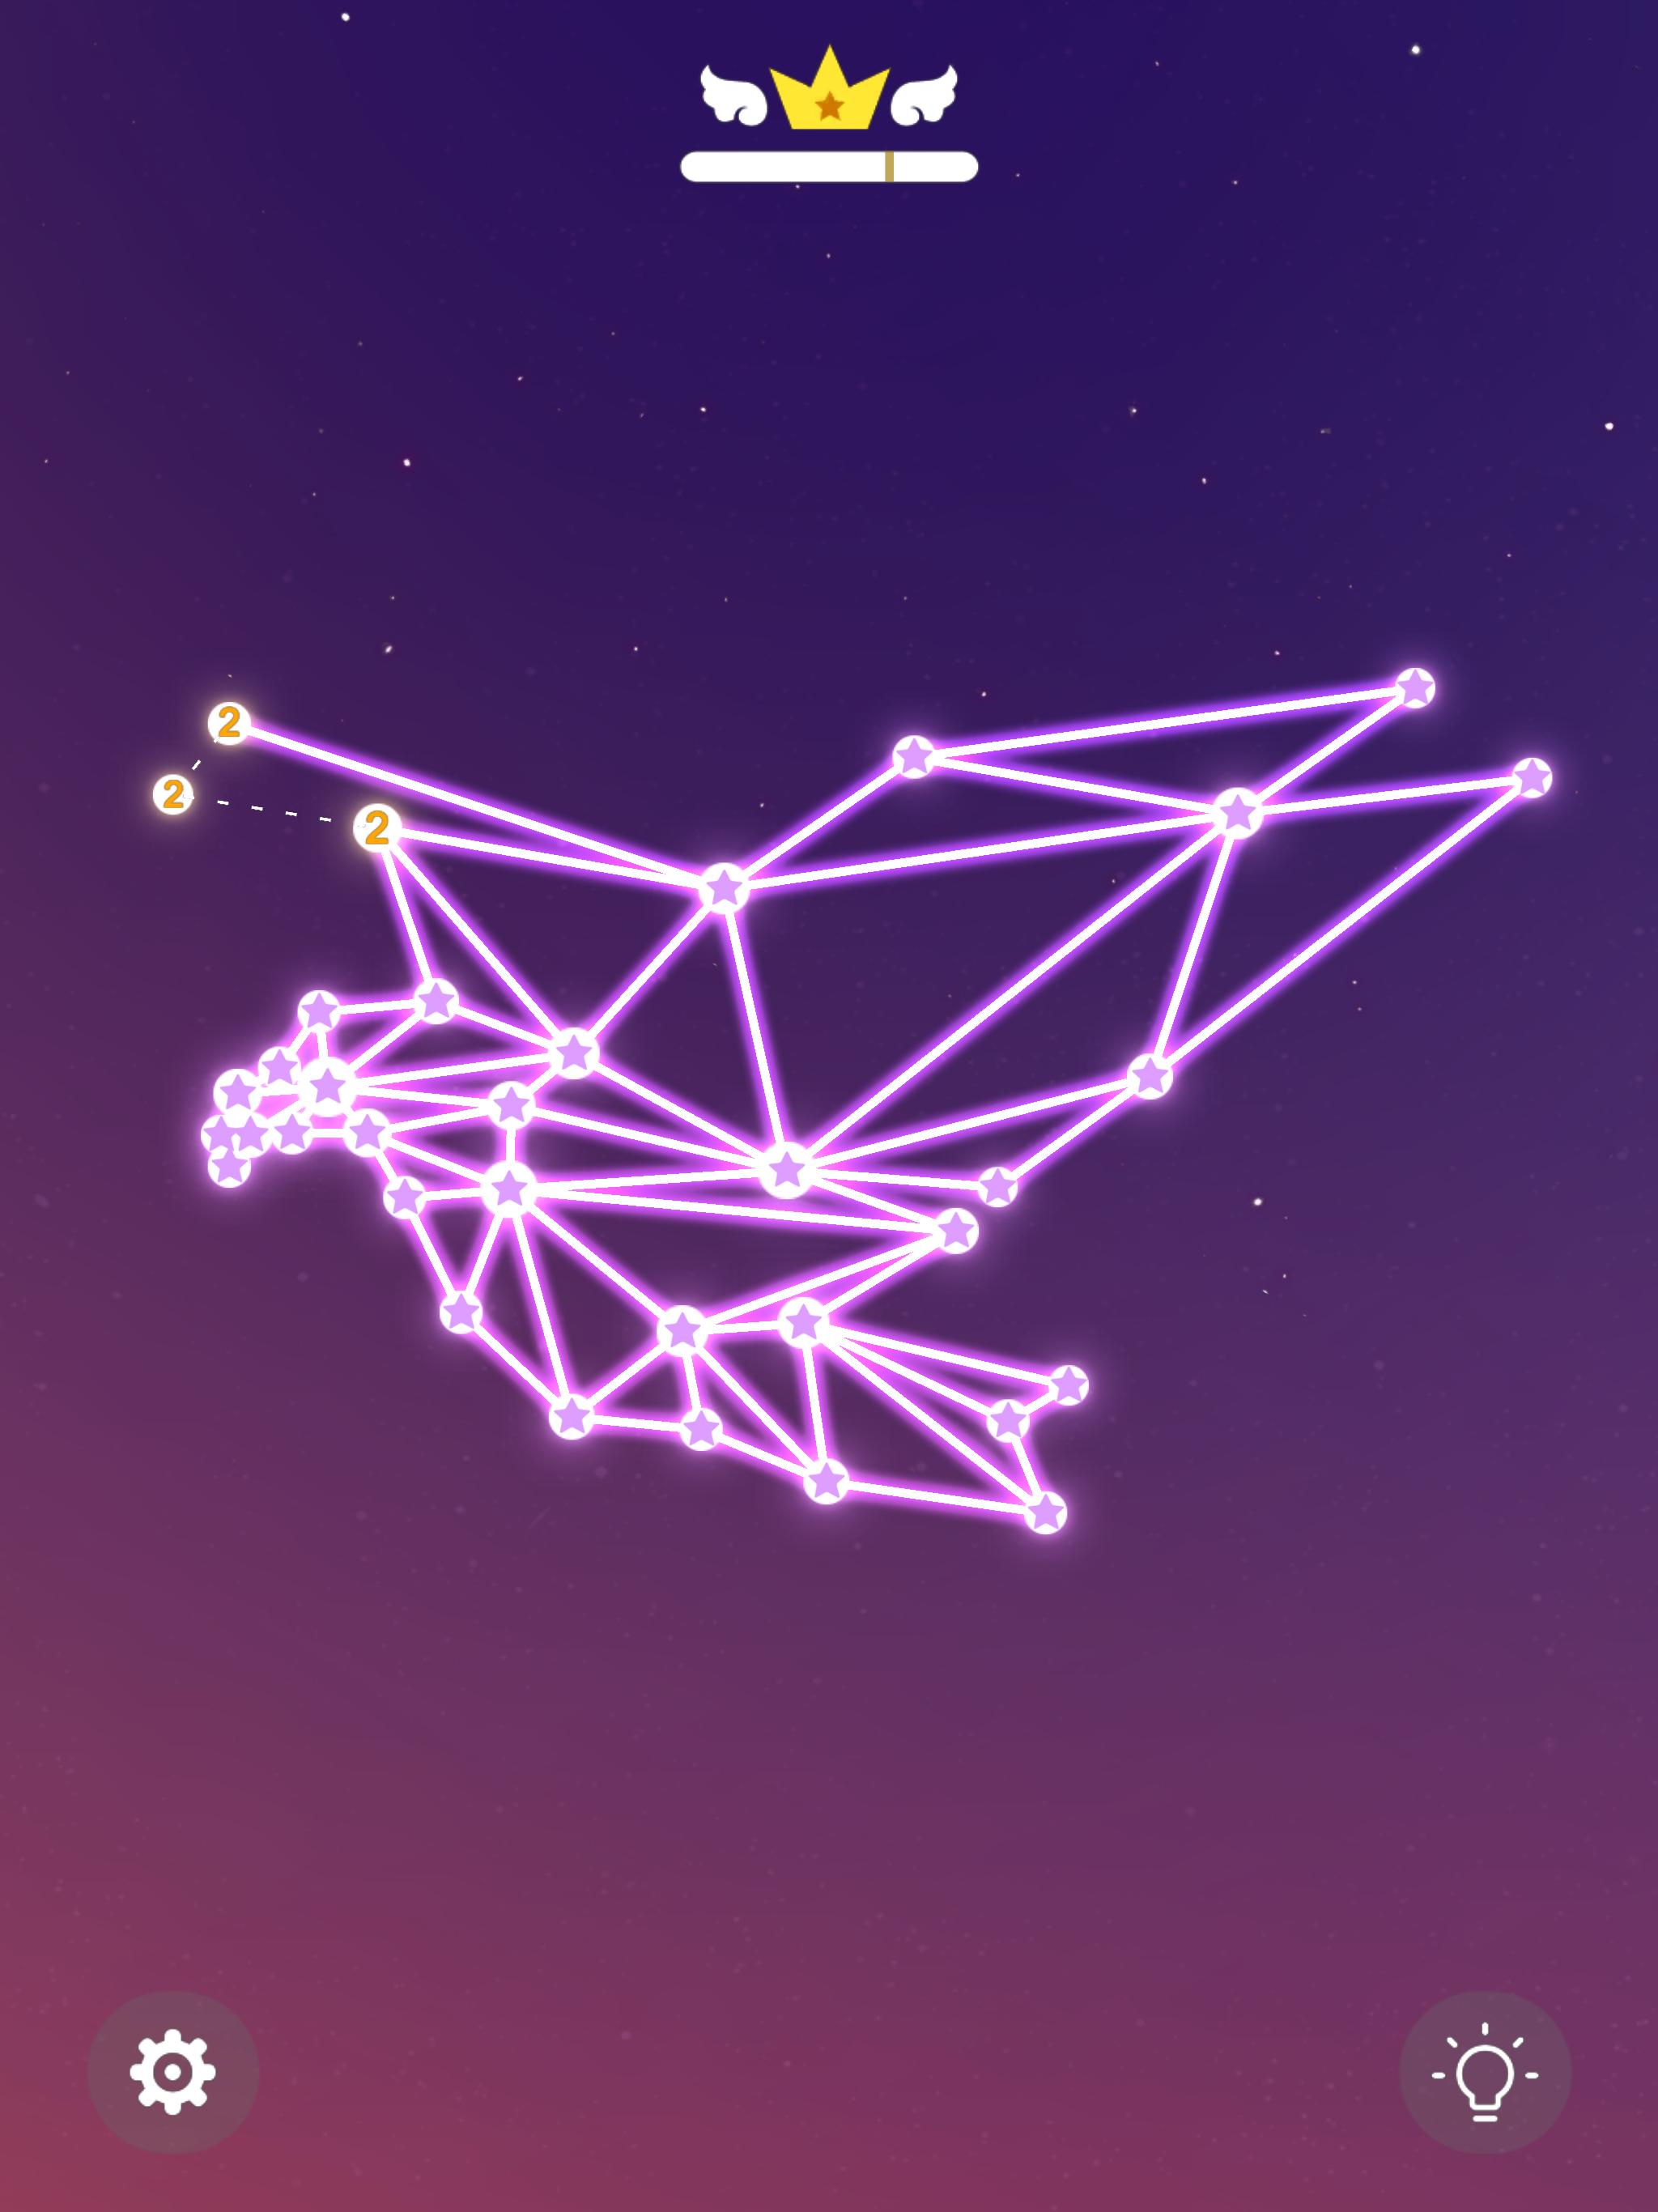 Linepoly Puzzle - Constellation games 1.2.3 Screenshot 17